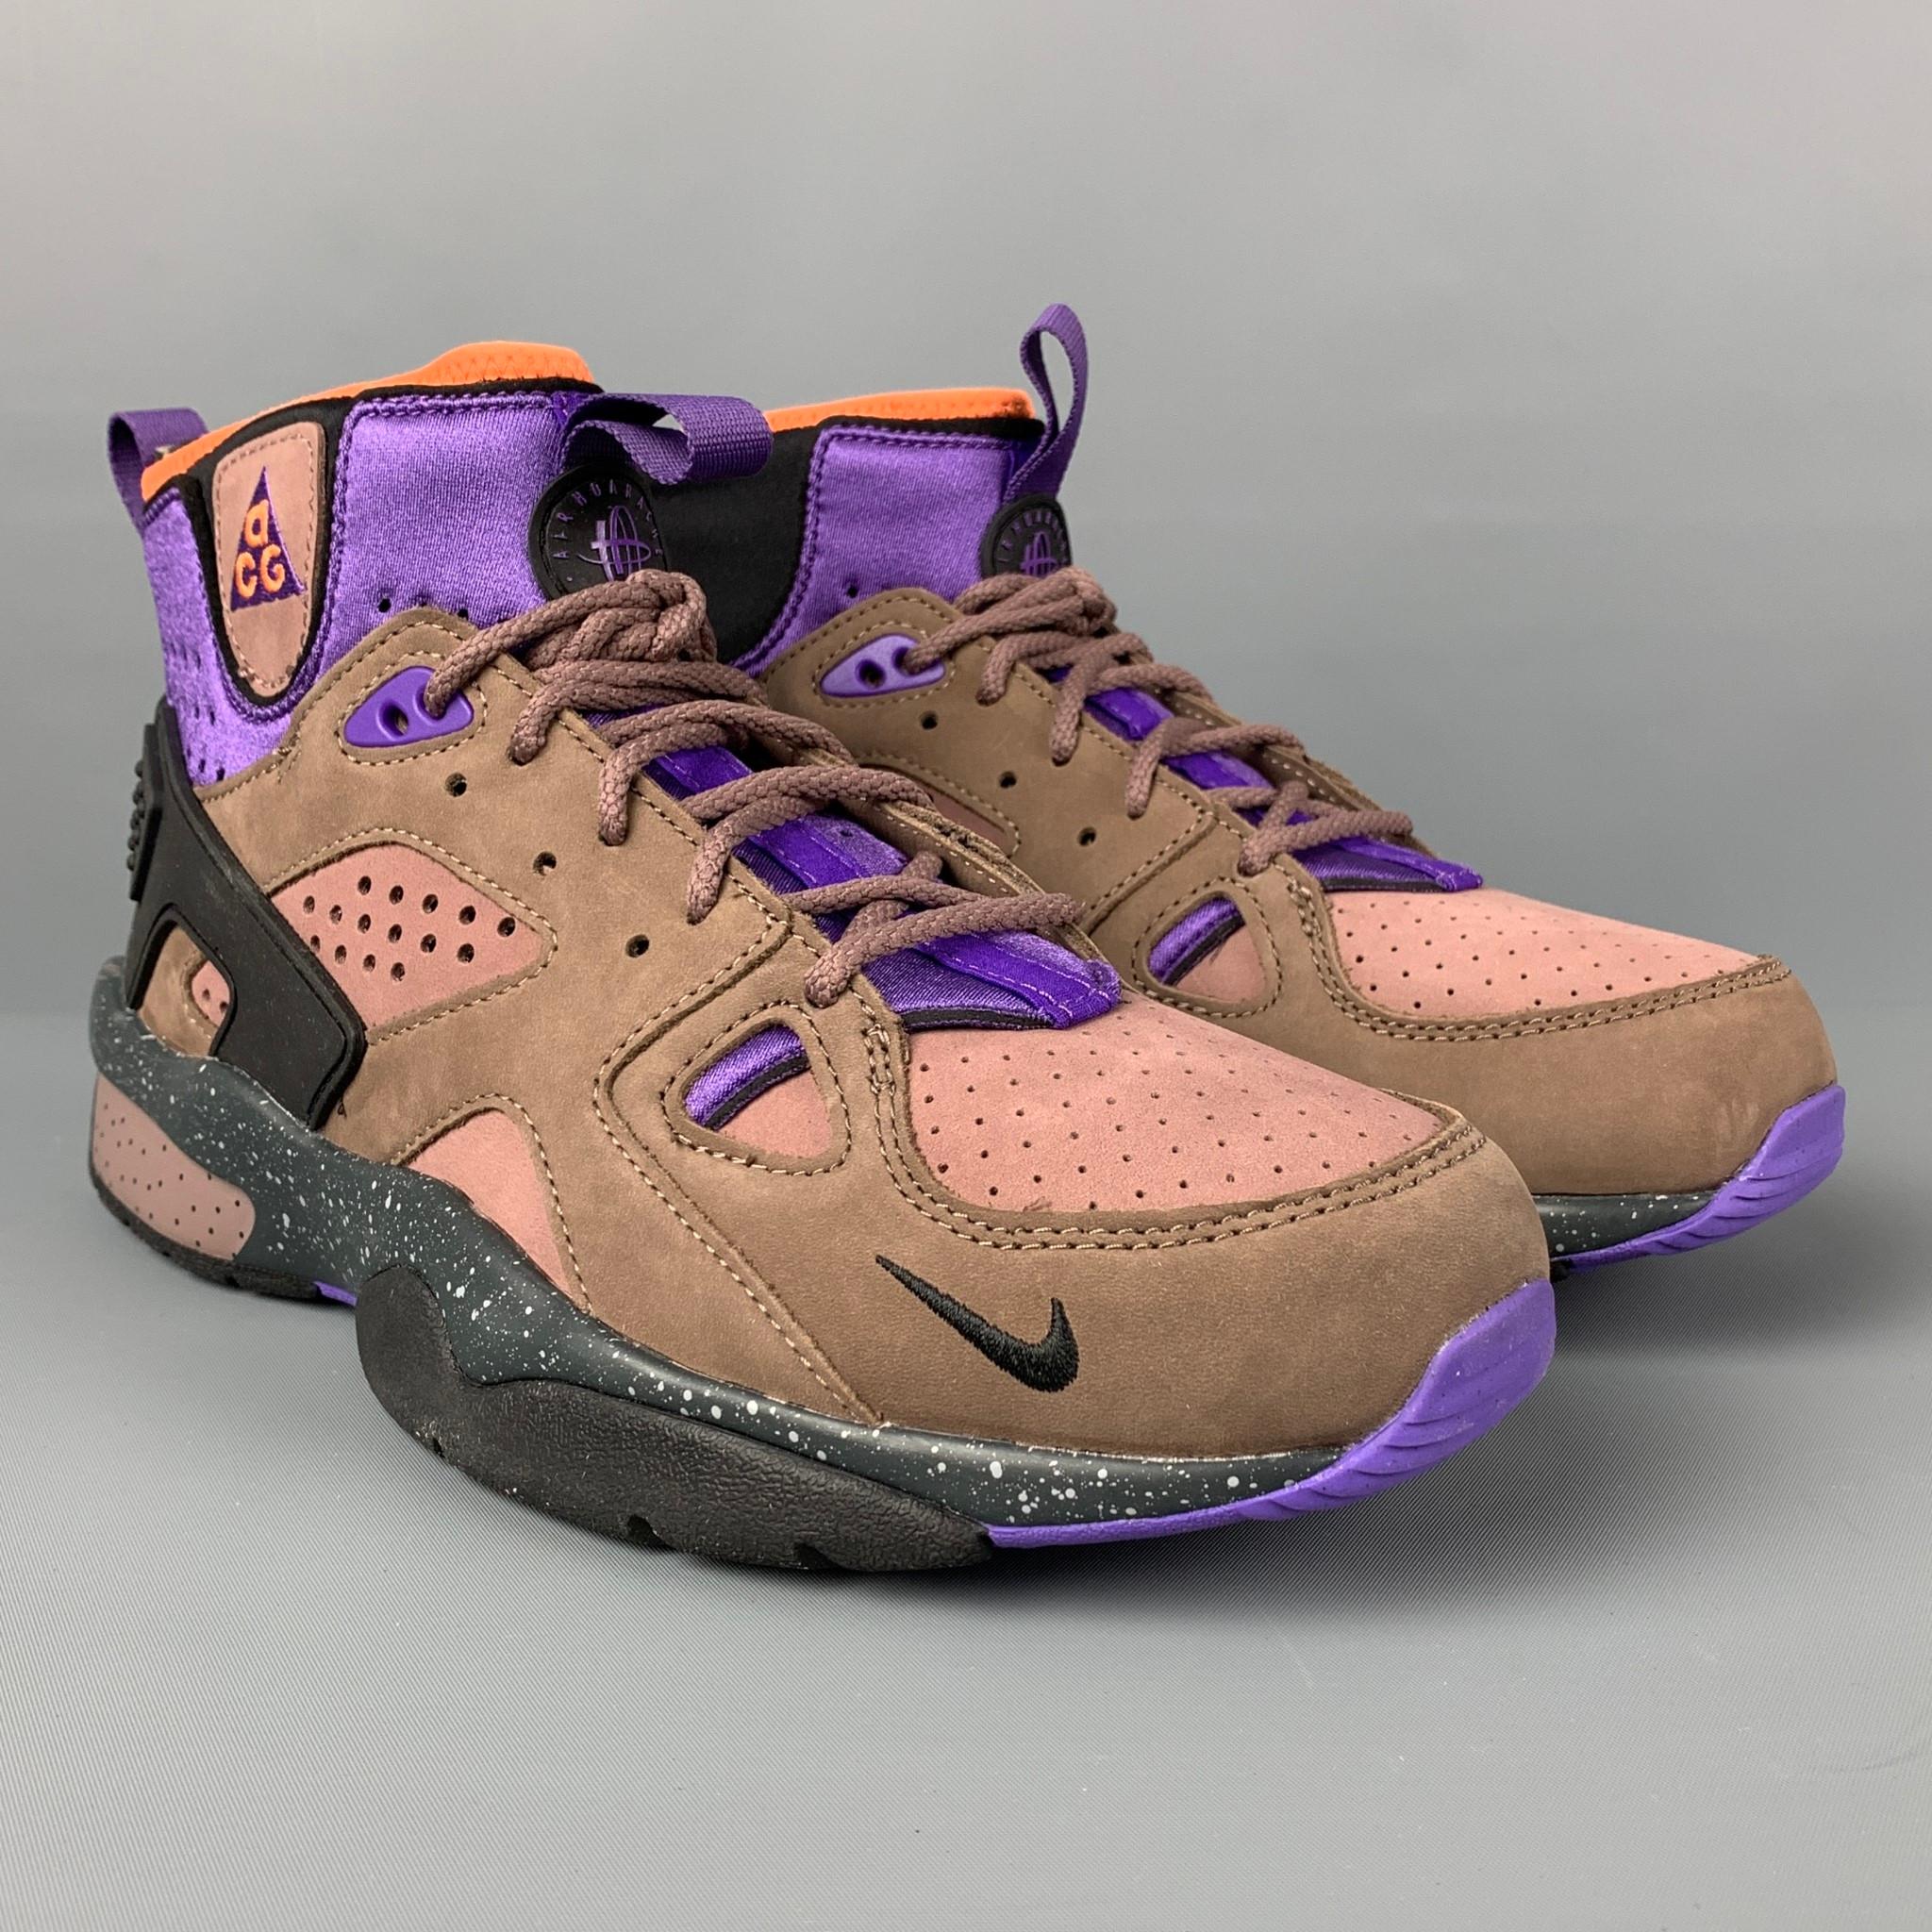 NIKE 'ACG AIR MOWABB' sneakers comes in a brown & purple two toned mixed material featuring a suede trim, high top, rubber sole, and a lace up closure. 

New With Box.
Marked: 9.5

Outsole: 12 in. x 4.25 in. 